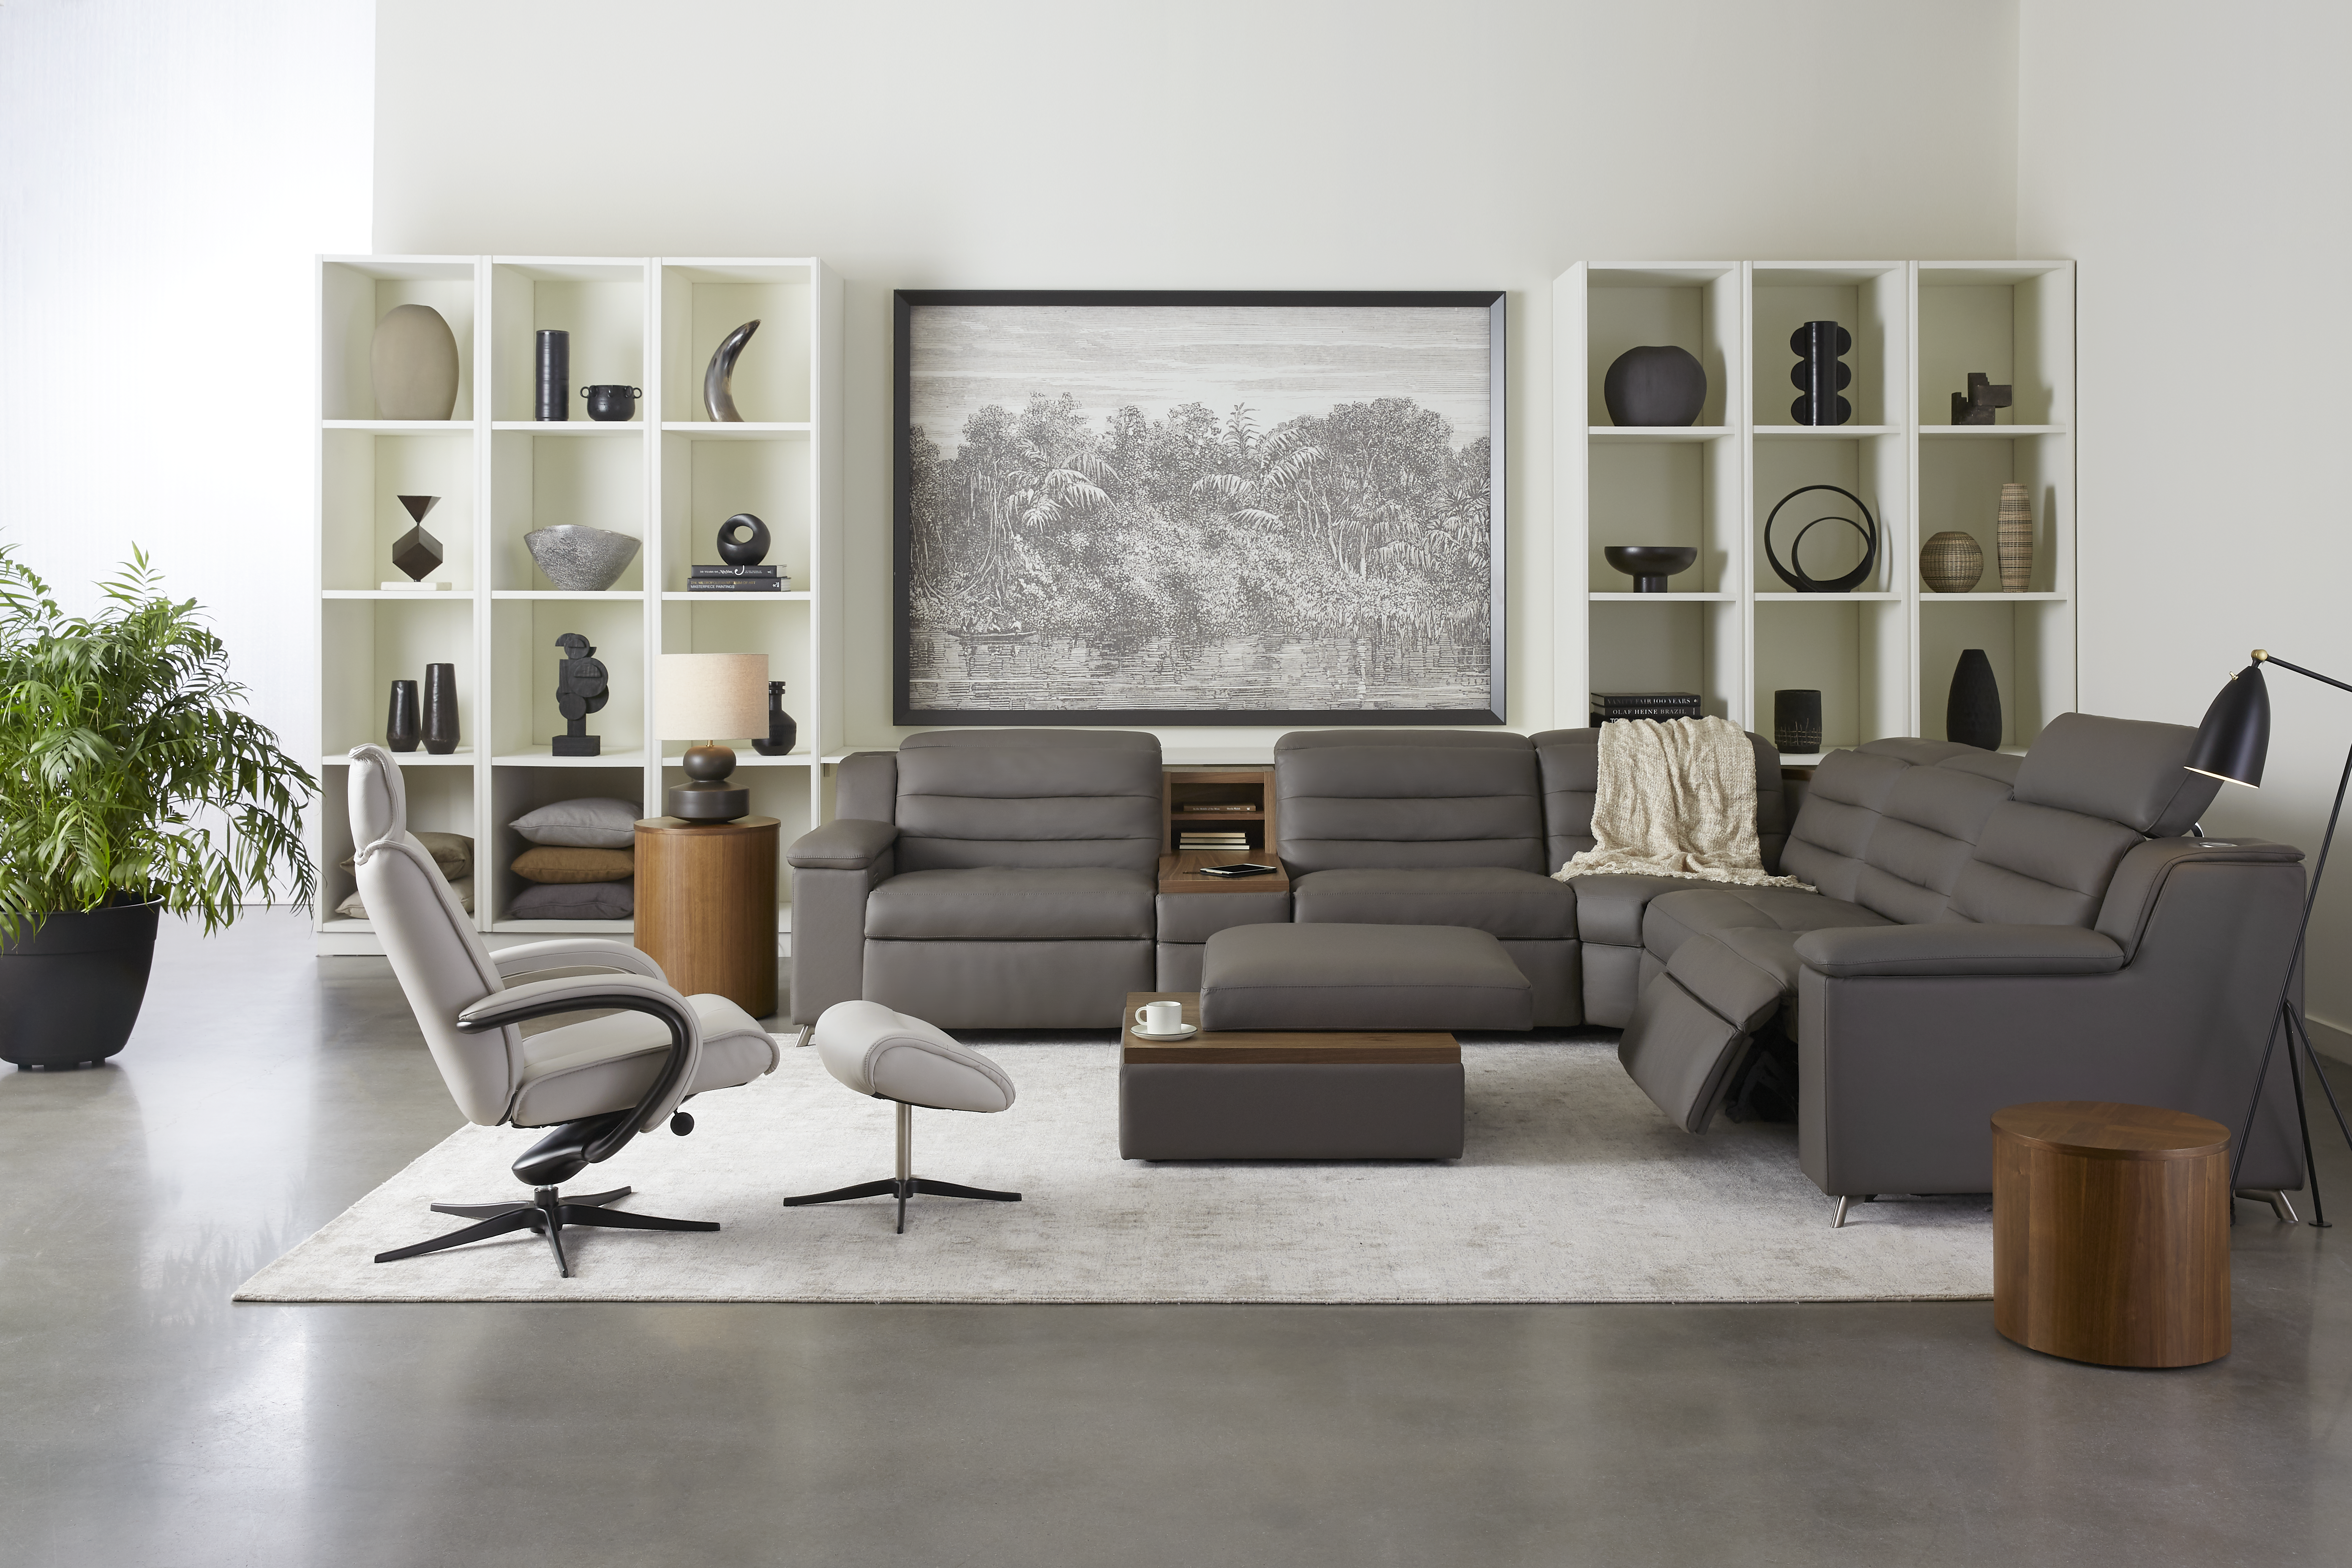 Leather is a chic classic that helps bring a touch of class to indoor spaces.